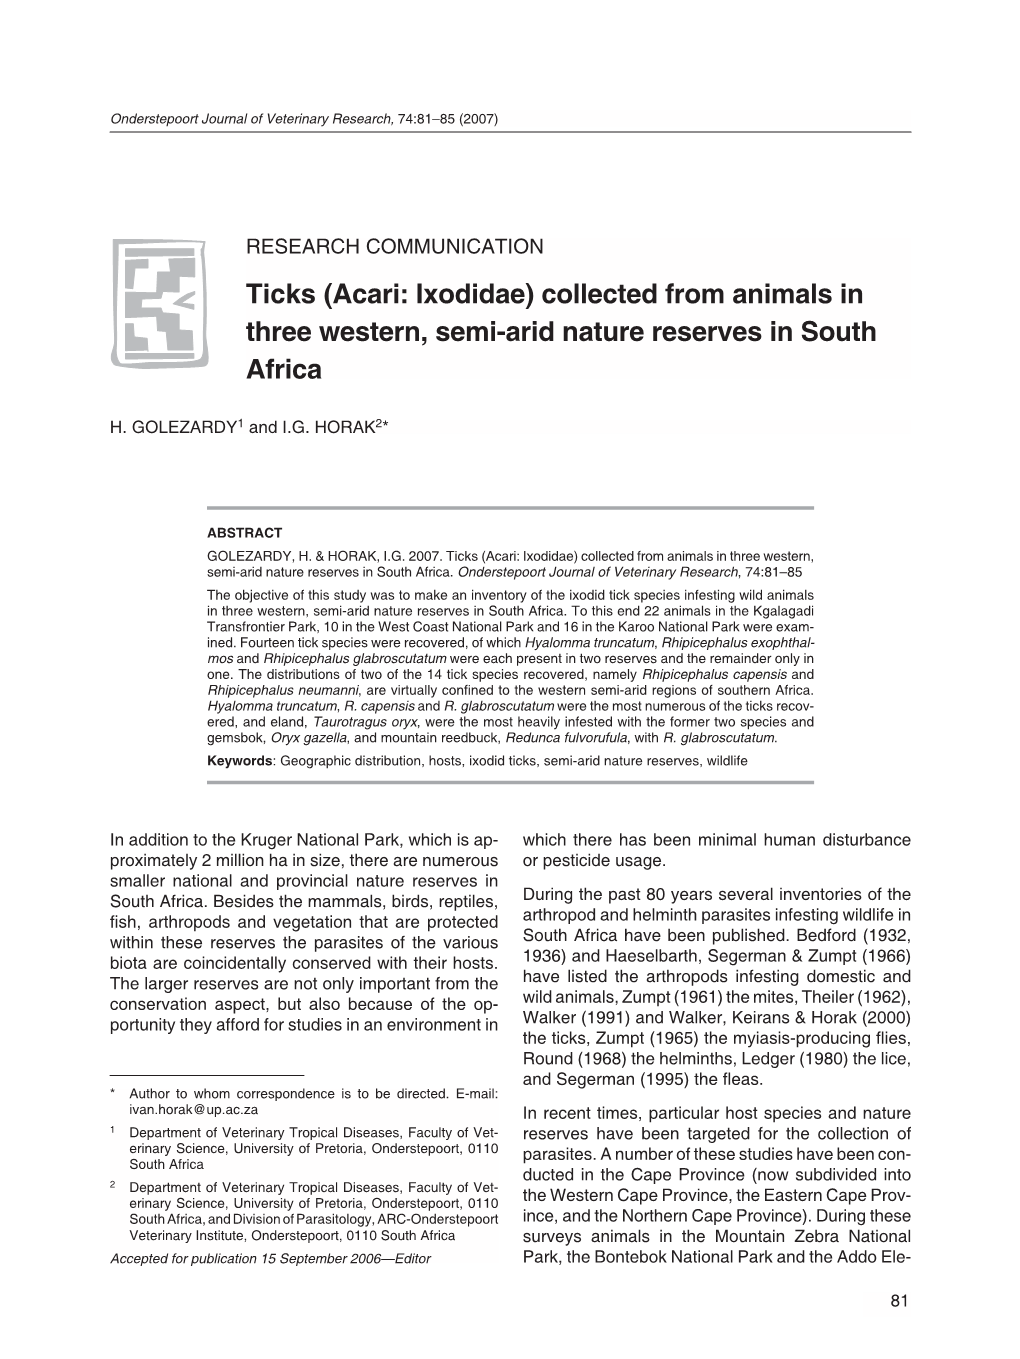 Acari: Ixodidae) Collected from Animals in Three Western, Semi-Arid Nature Reserves in South Africa